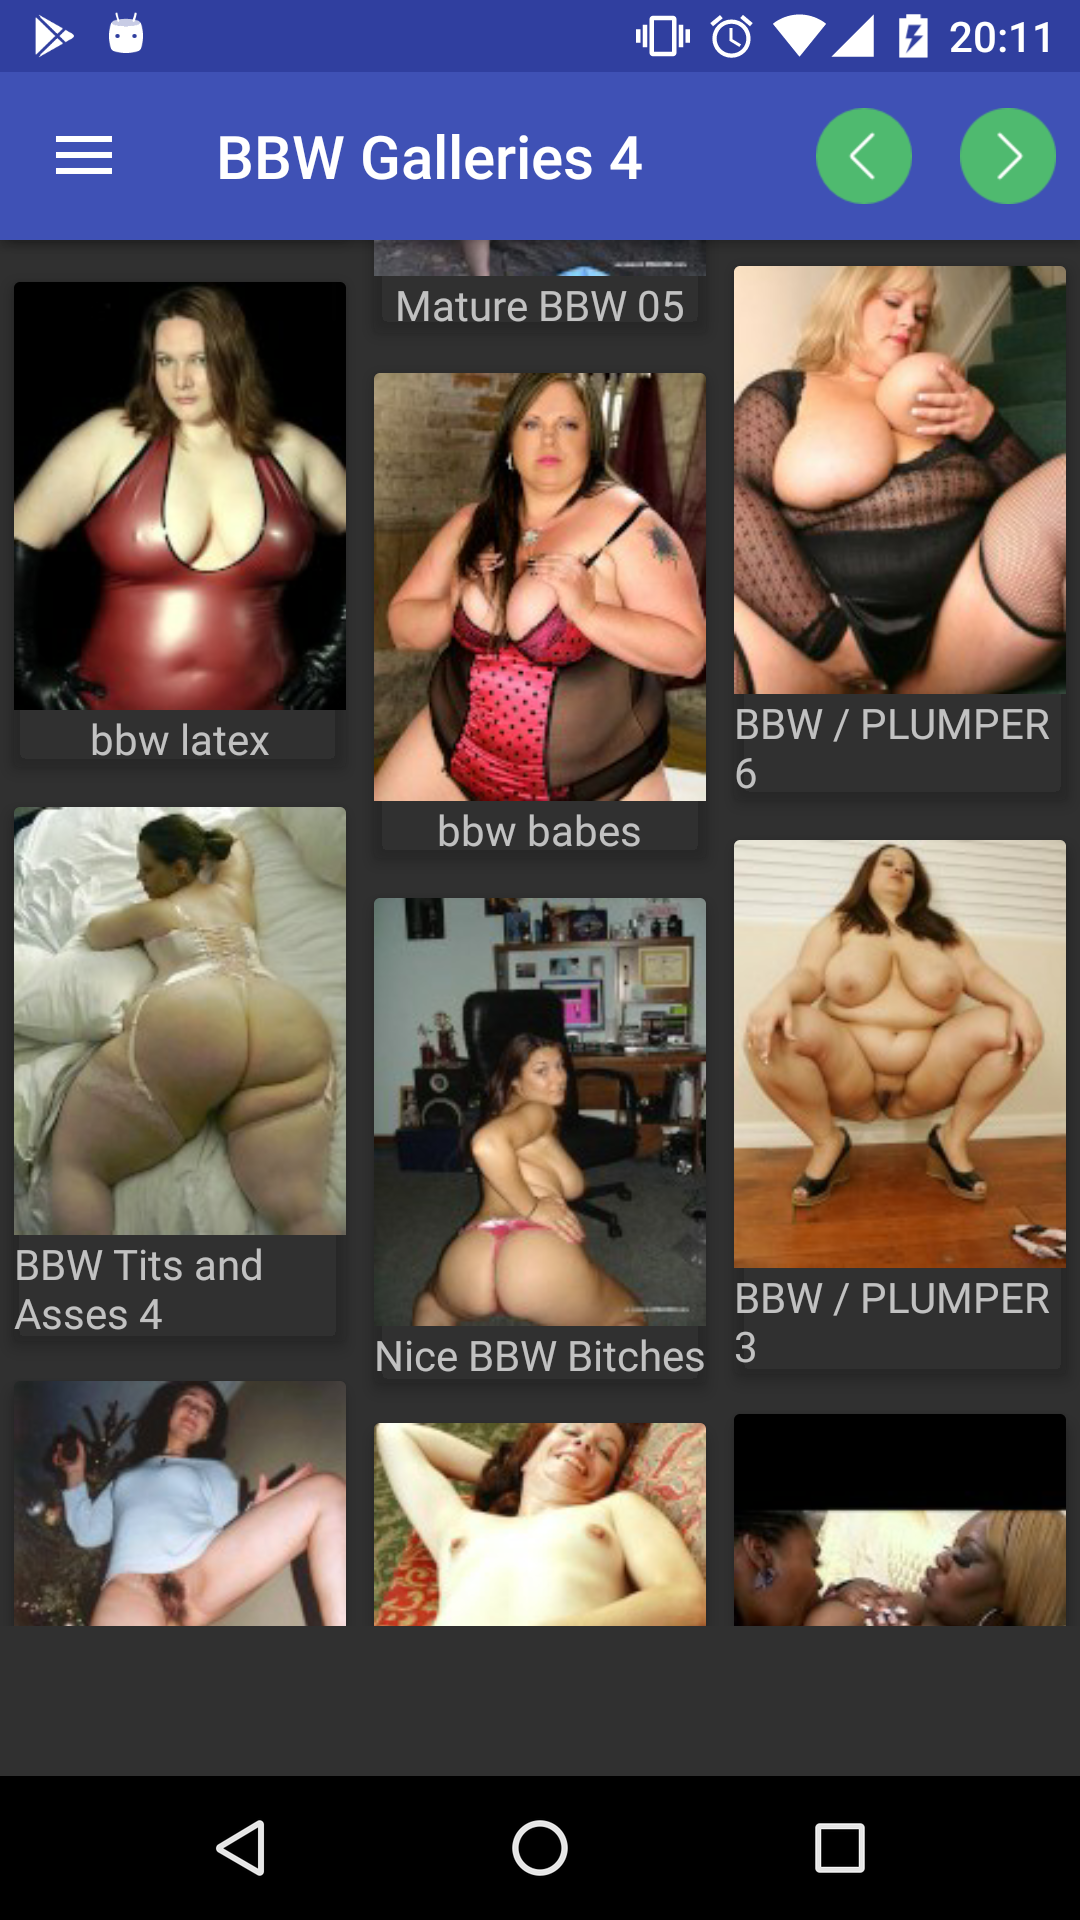 BBW Girls wallpaper,download,free,chubby,amateurs,henti,images,hentai,anime,pornstar,apps,galleries,girls,sex,porn,pics,pornstars,bbw,walpapers,app,fatty,picture,sexy,shemale,top,picks